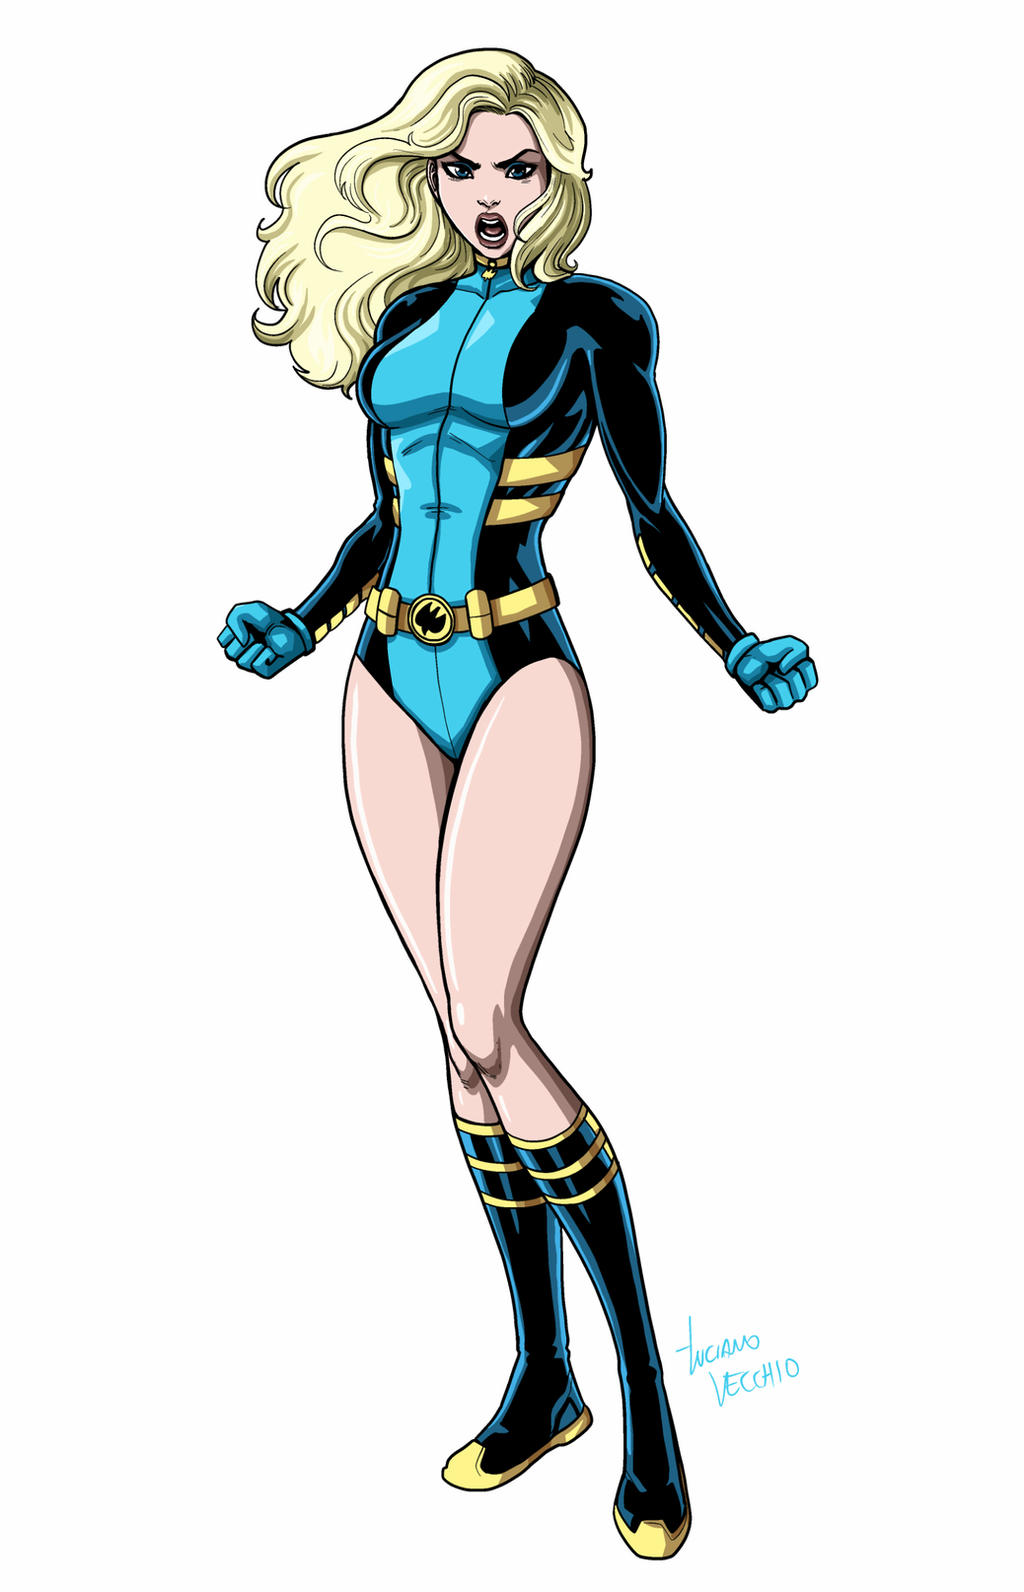 Black Canary Art by lucianovecchio